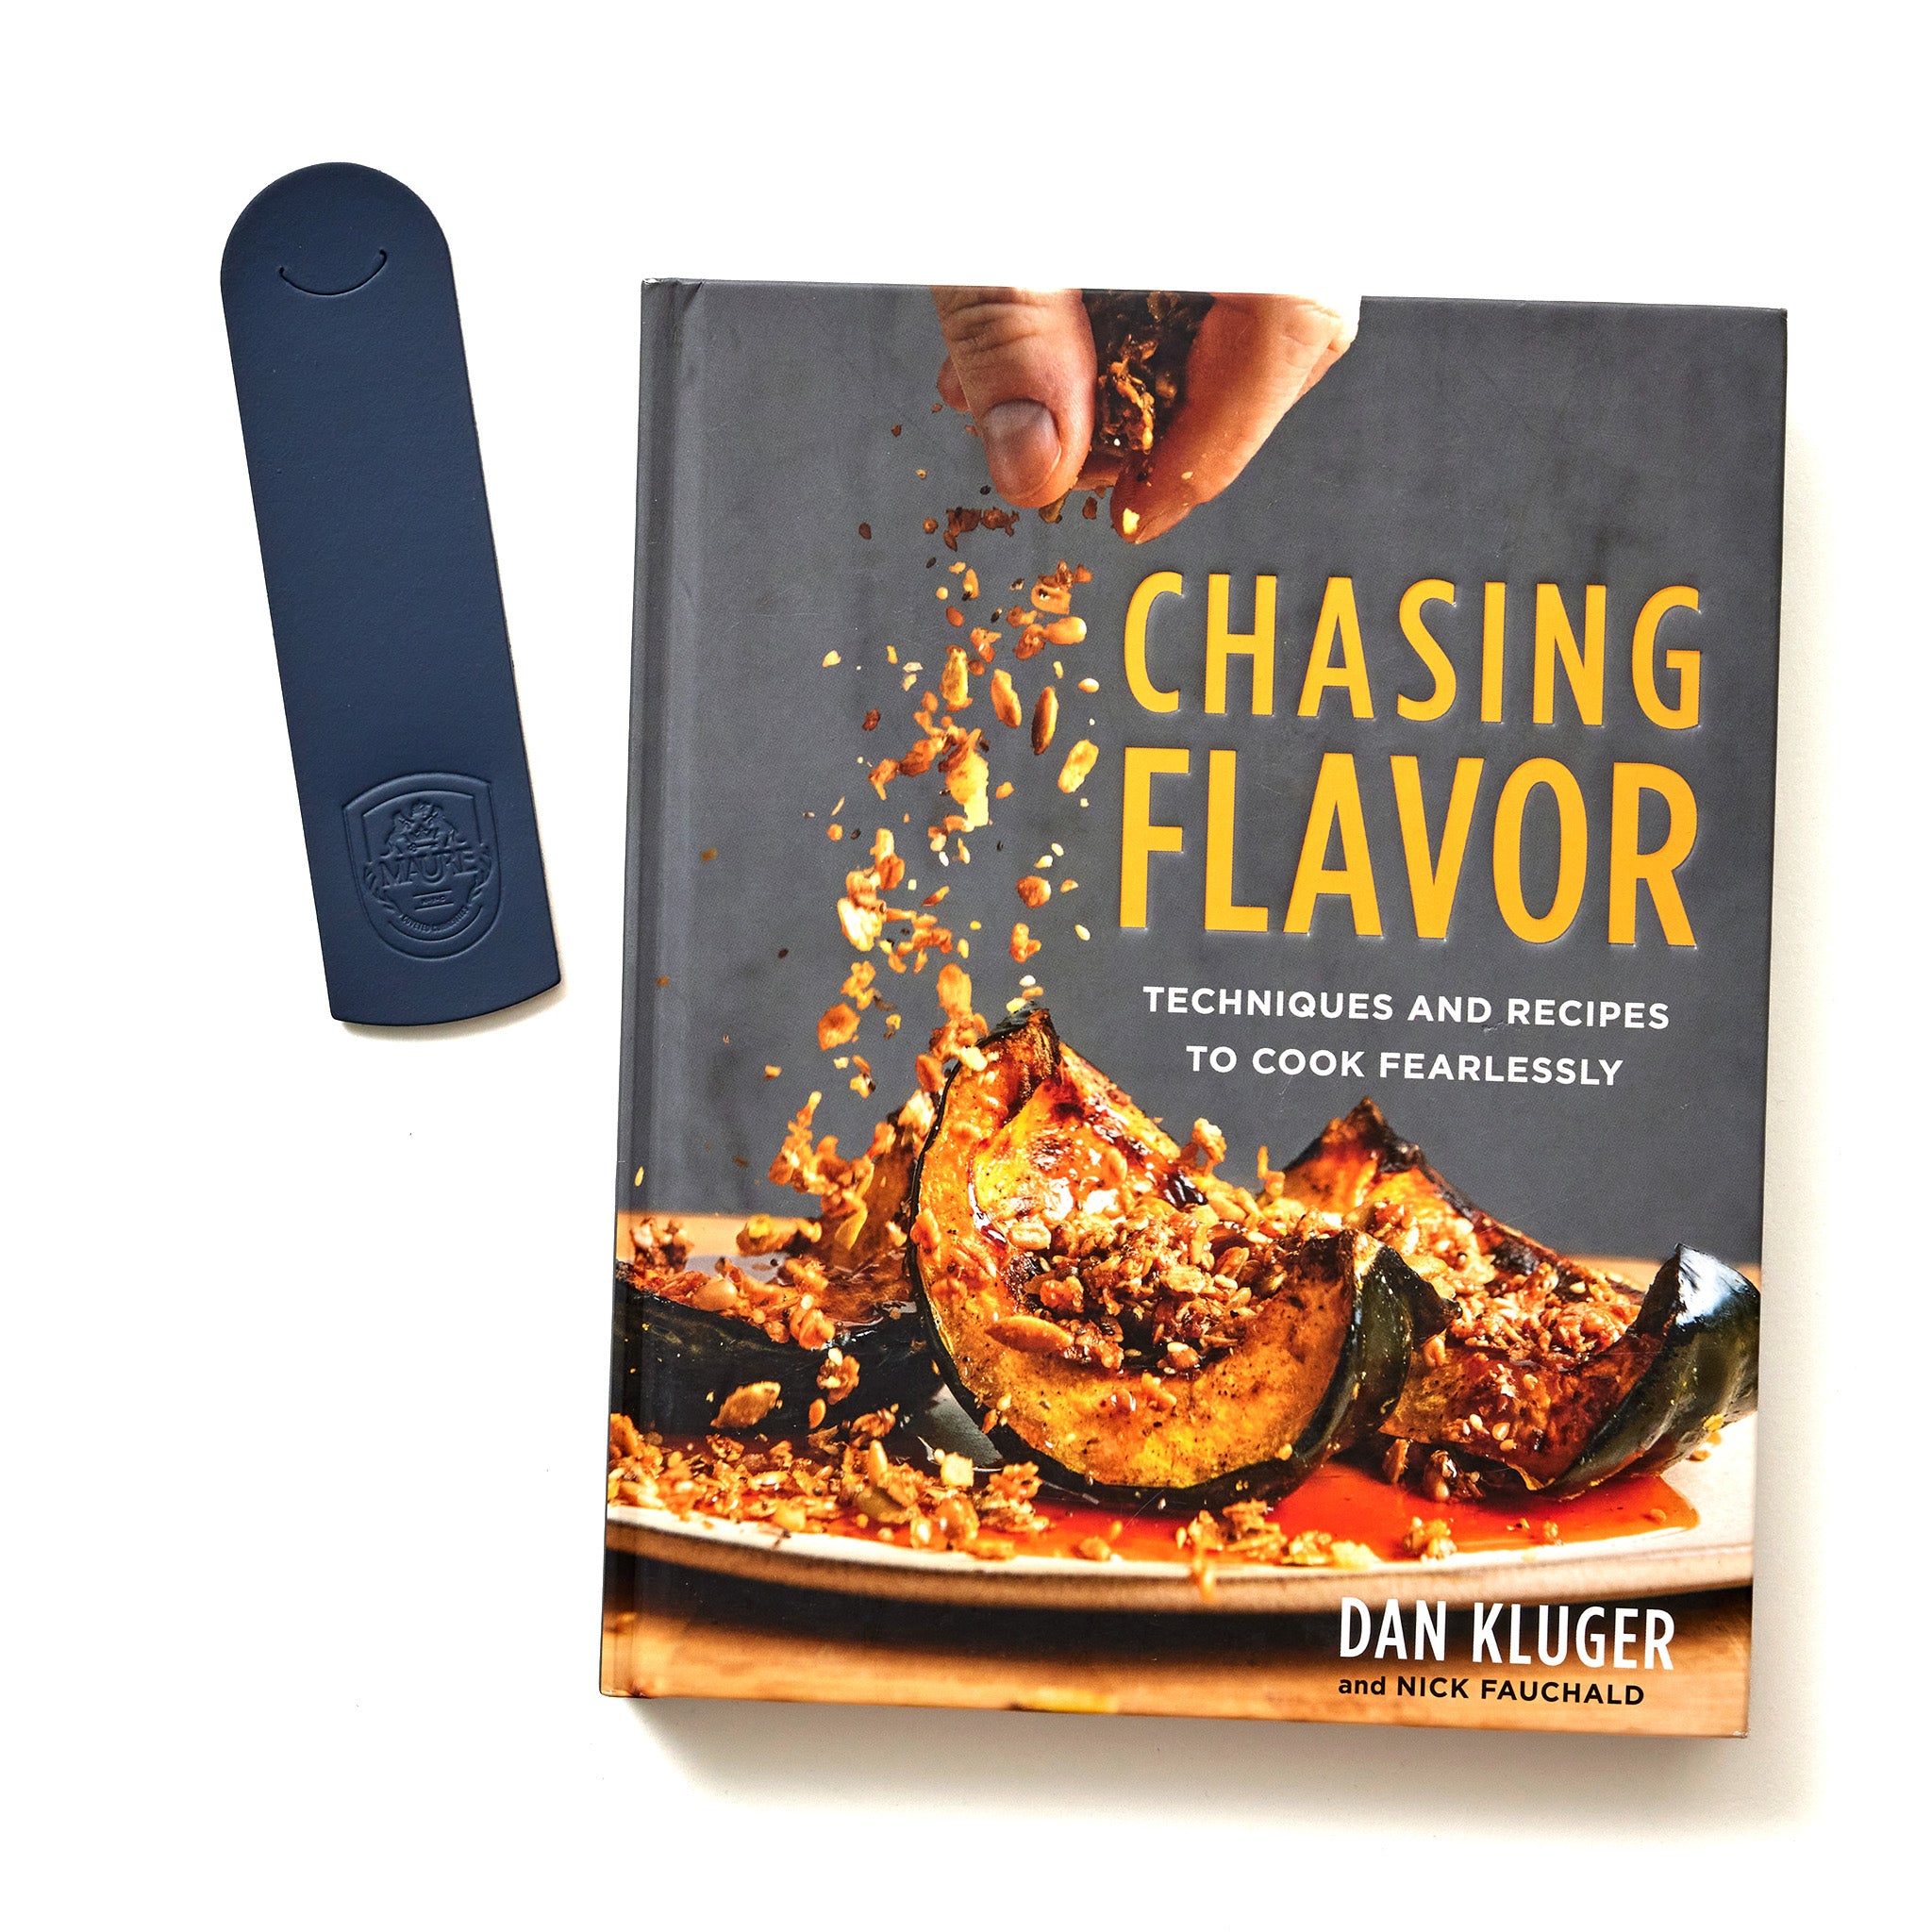 A cookbook titled 'Chasing Flavor: Techniques and Recipes to Cook Fearlessly' by Dan Kluger and Nick Fauchald, with a navy blue bookmark placed beside it. The cover features an image of hands sprinkling toppings onto roasted squash. The bookmark has the Maure crest embossed on it. The book and bookmark are set against a white background, highlighting their details.